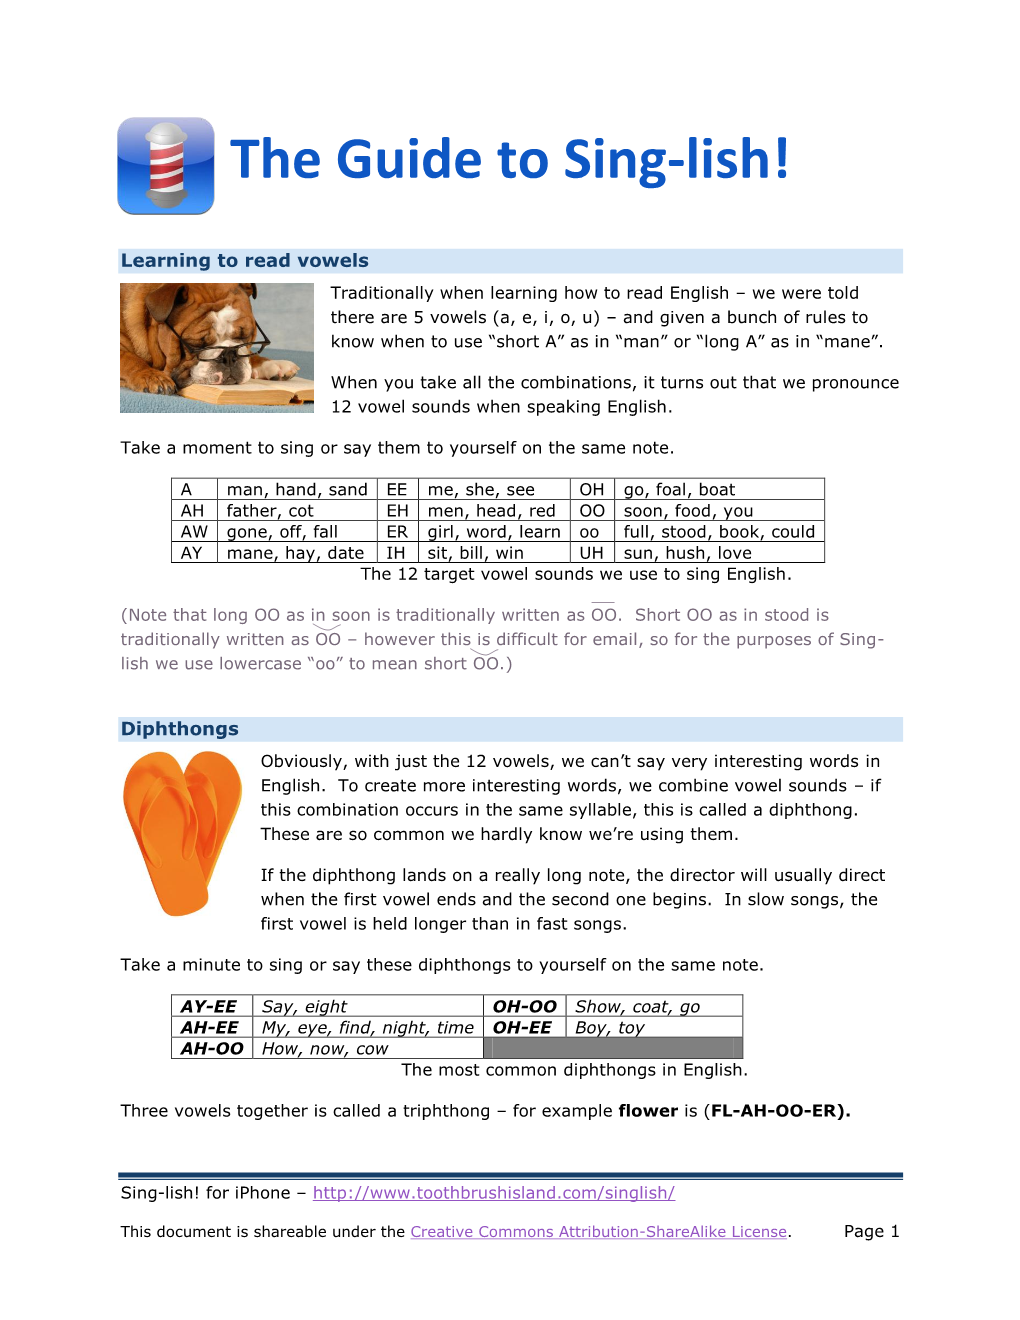 The Guide to Sing-Lish!